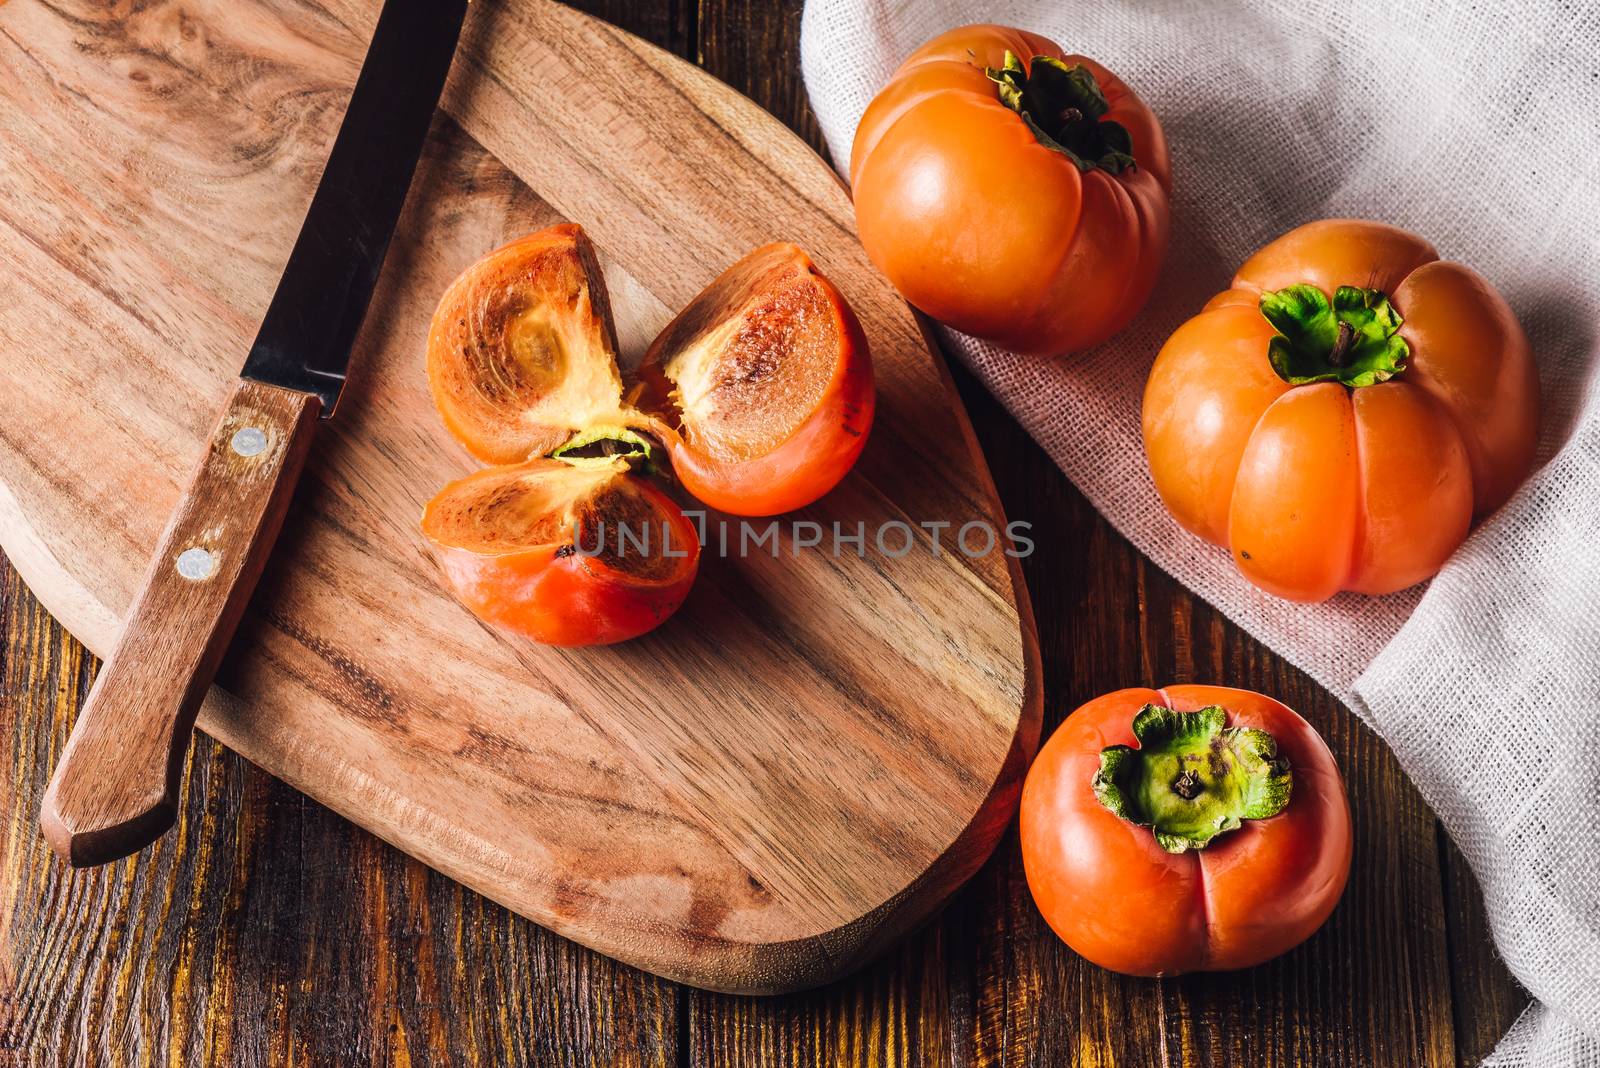 Sliced Persimmon with Knife on Cutting Board